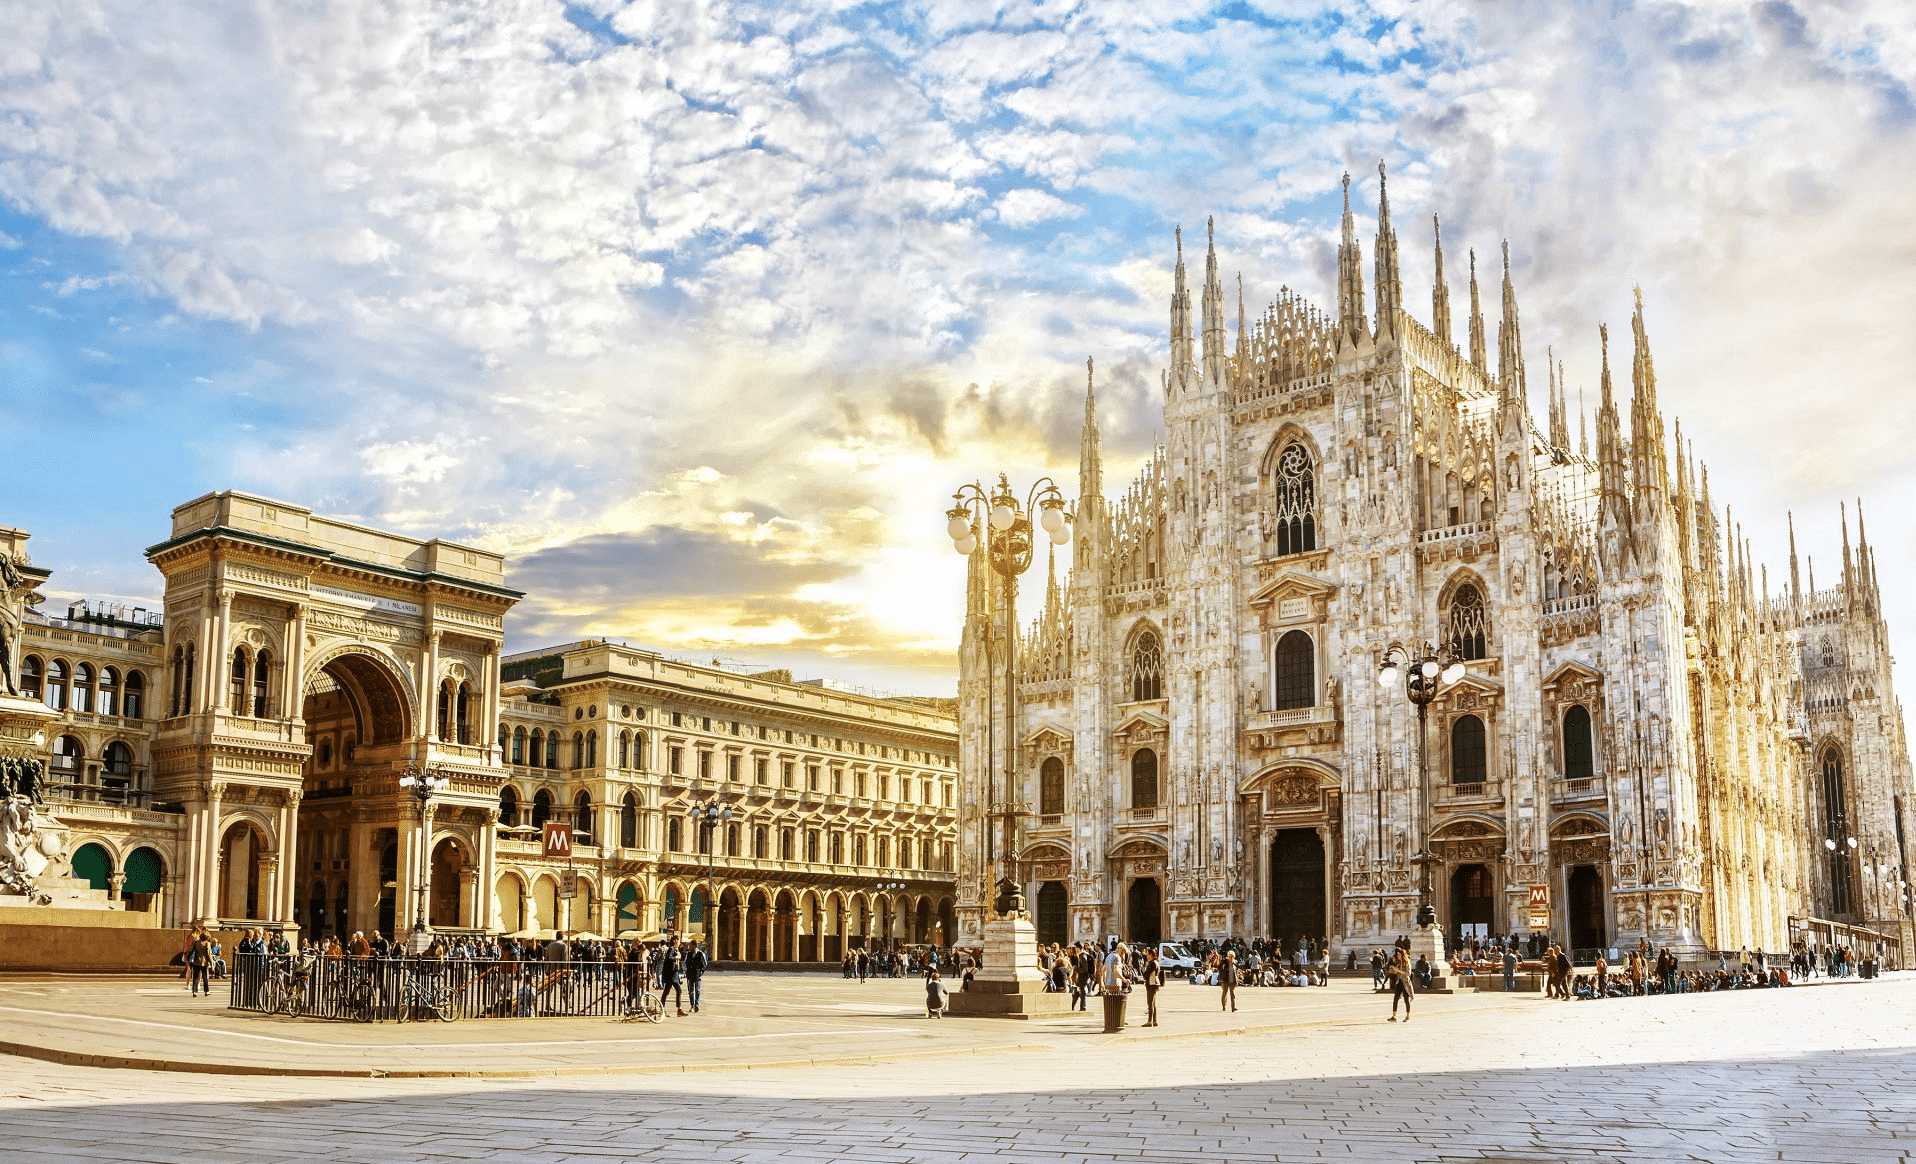 Popular in Milan(Get Up to 15% Off)